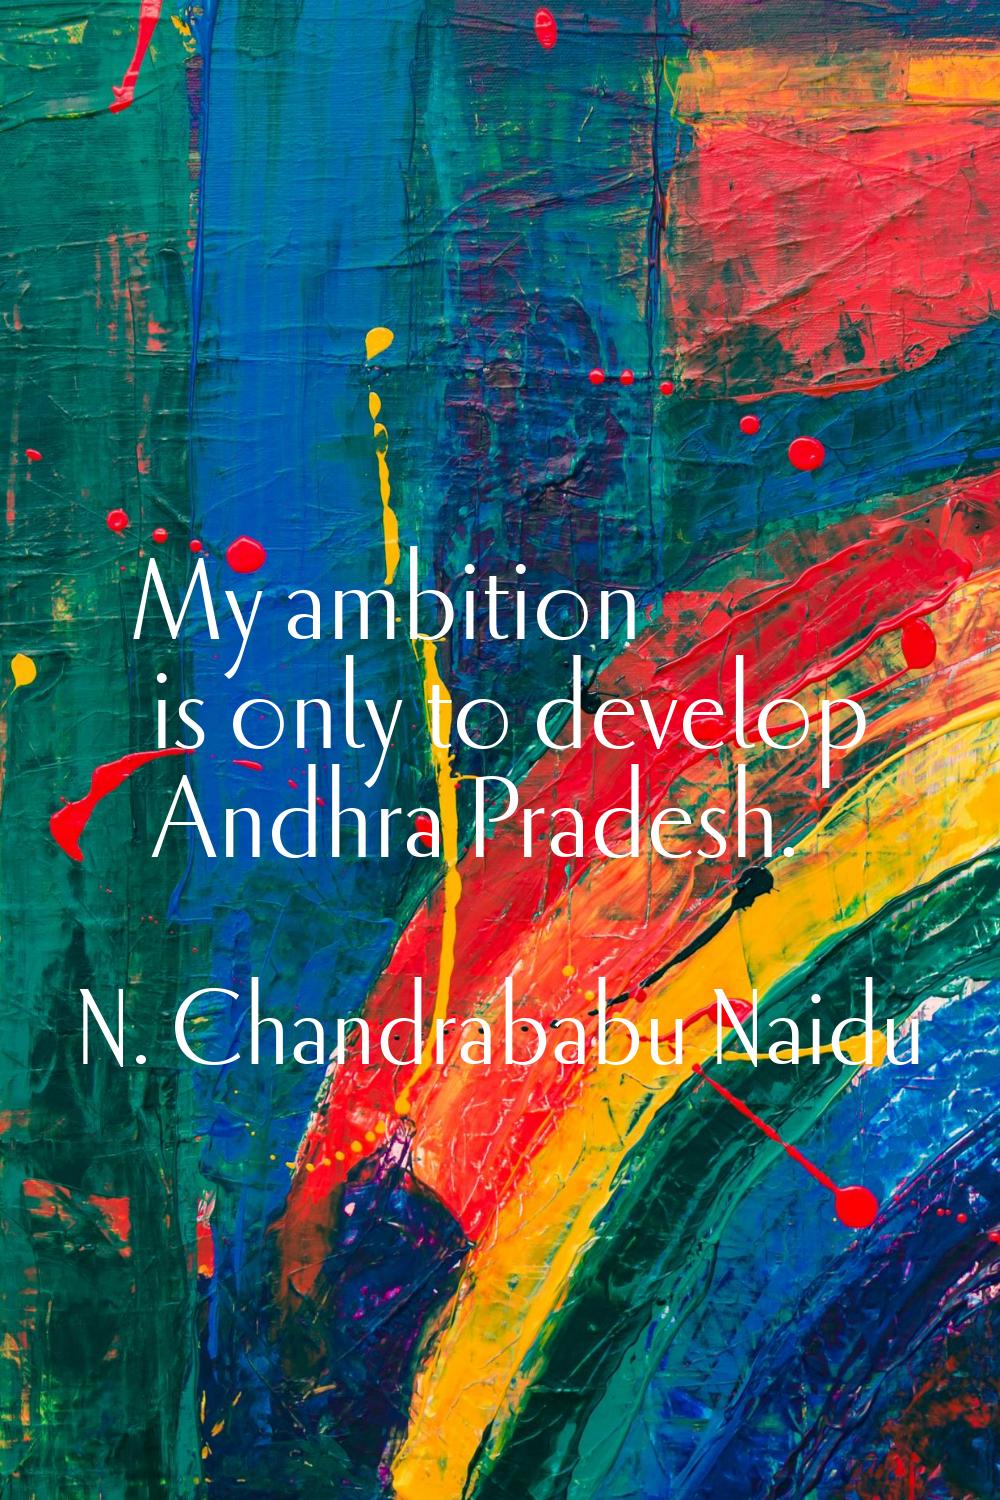 My ambition is only to develop Andhra Pradesh.